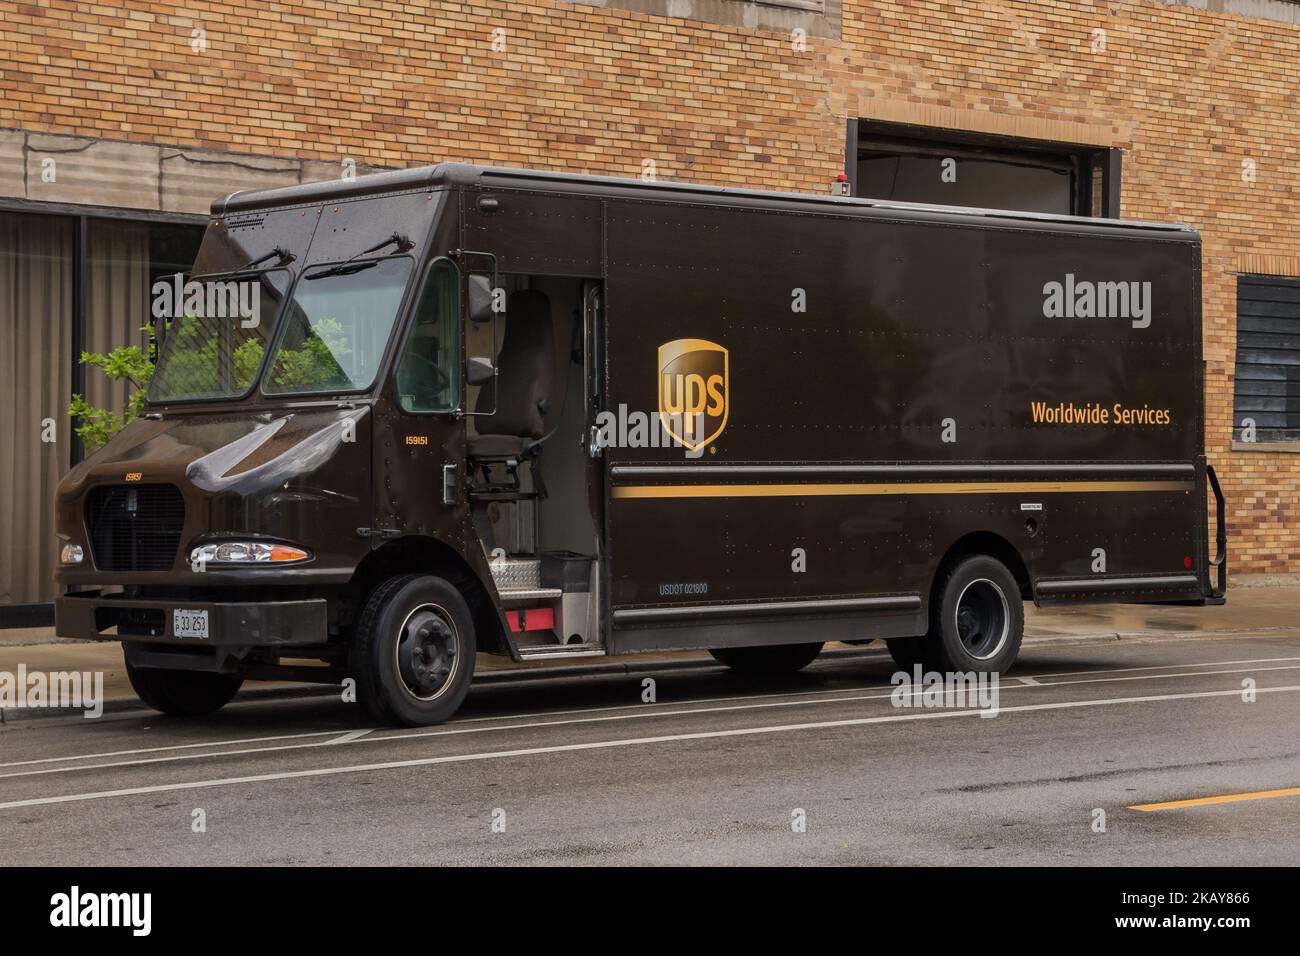 A United Parcel Service of America truck and drop-off box are seen along Milwaukee Avenue in the Old Irving Park neighborhood of Chicago, IL on June 6, 2018. The union announced that members voted more than 90% in favor of going on strike, if a deal is not reached before the current labor contract expires on August 1. UPS employs 260,000 Teamsters. The shipments UPS transports is an estimated 6% of the United States' GDP, which would disrupt the US economy if their is a walkout. UPS's previous strike was in 1997 for 16 days. (Photo by Patrick Gorski/NurPhoto) Stock Photo